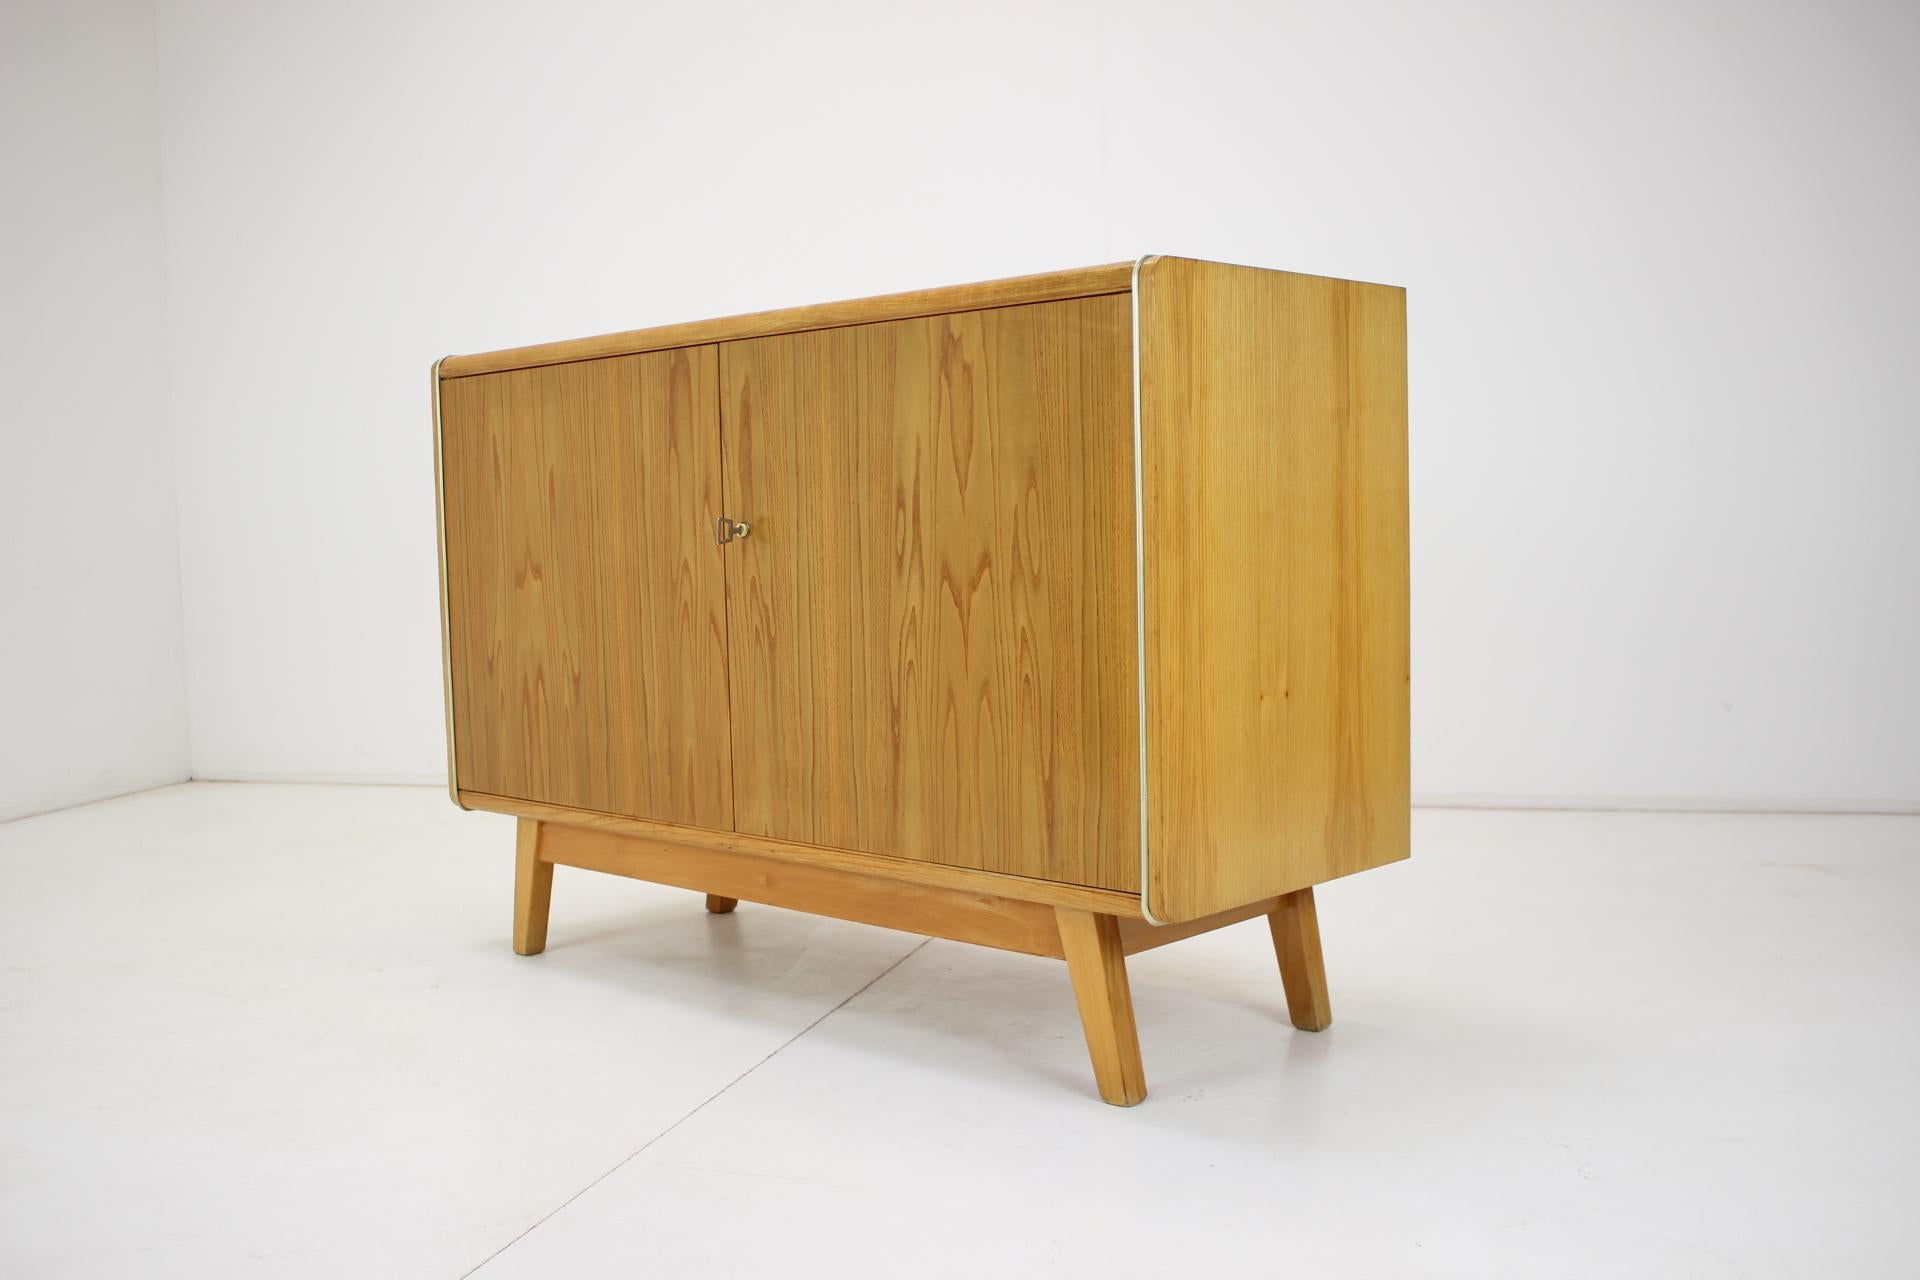 Vintage Cabinet Combination of Veneer and Glass by Jitona, 1960s For Sale 1